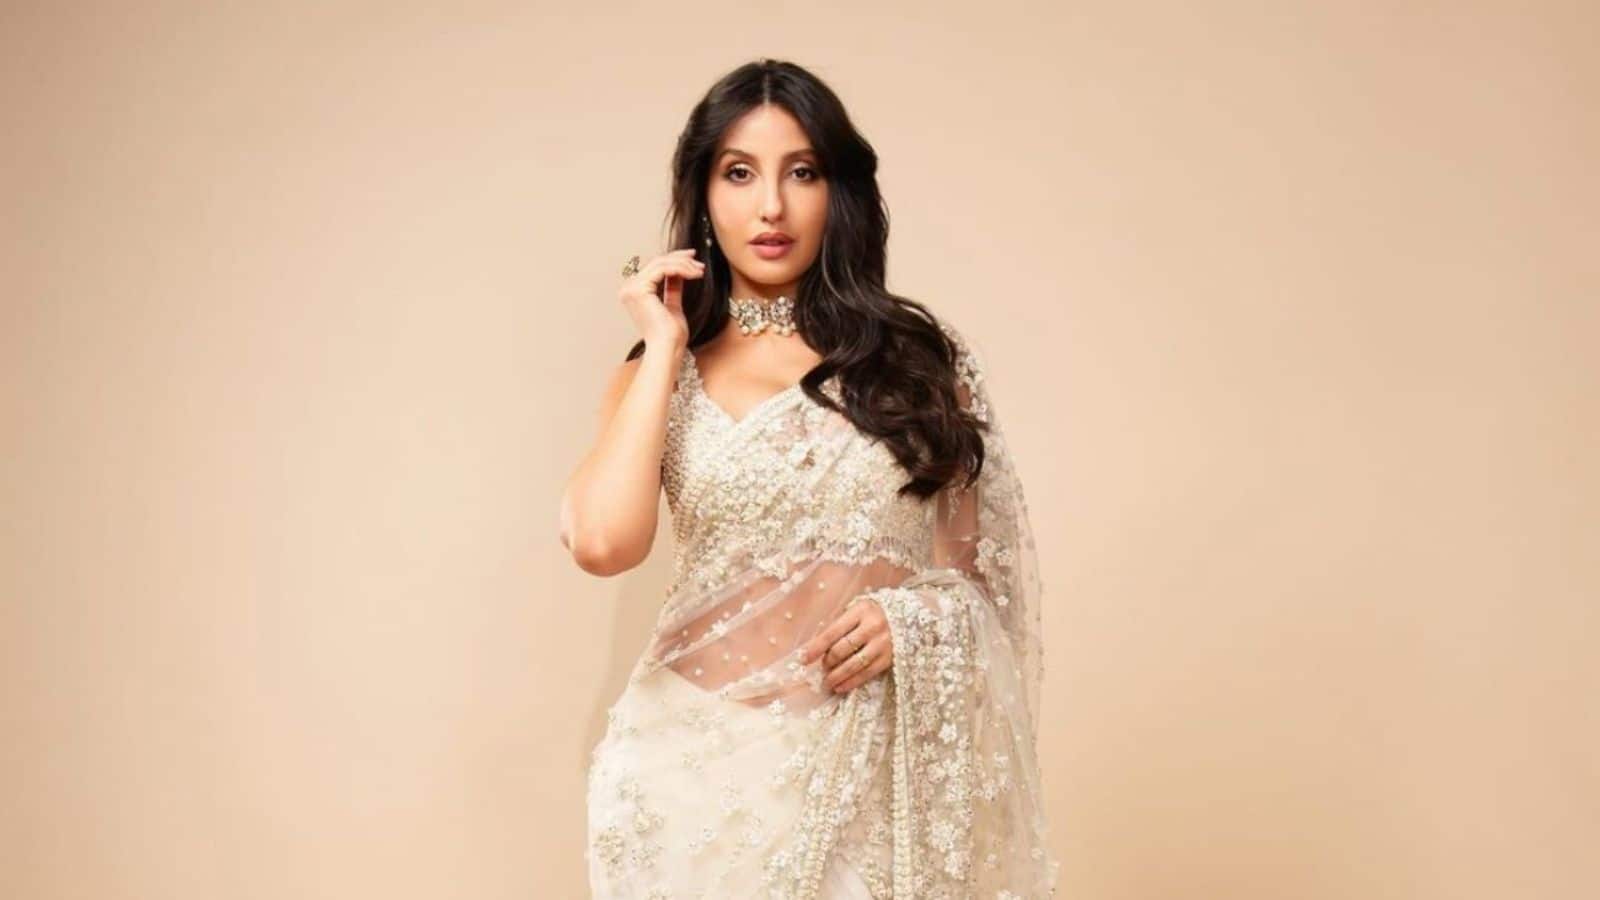 'Sole breadwinner' Nora Fatehi works '24/7' to support family